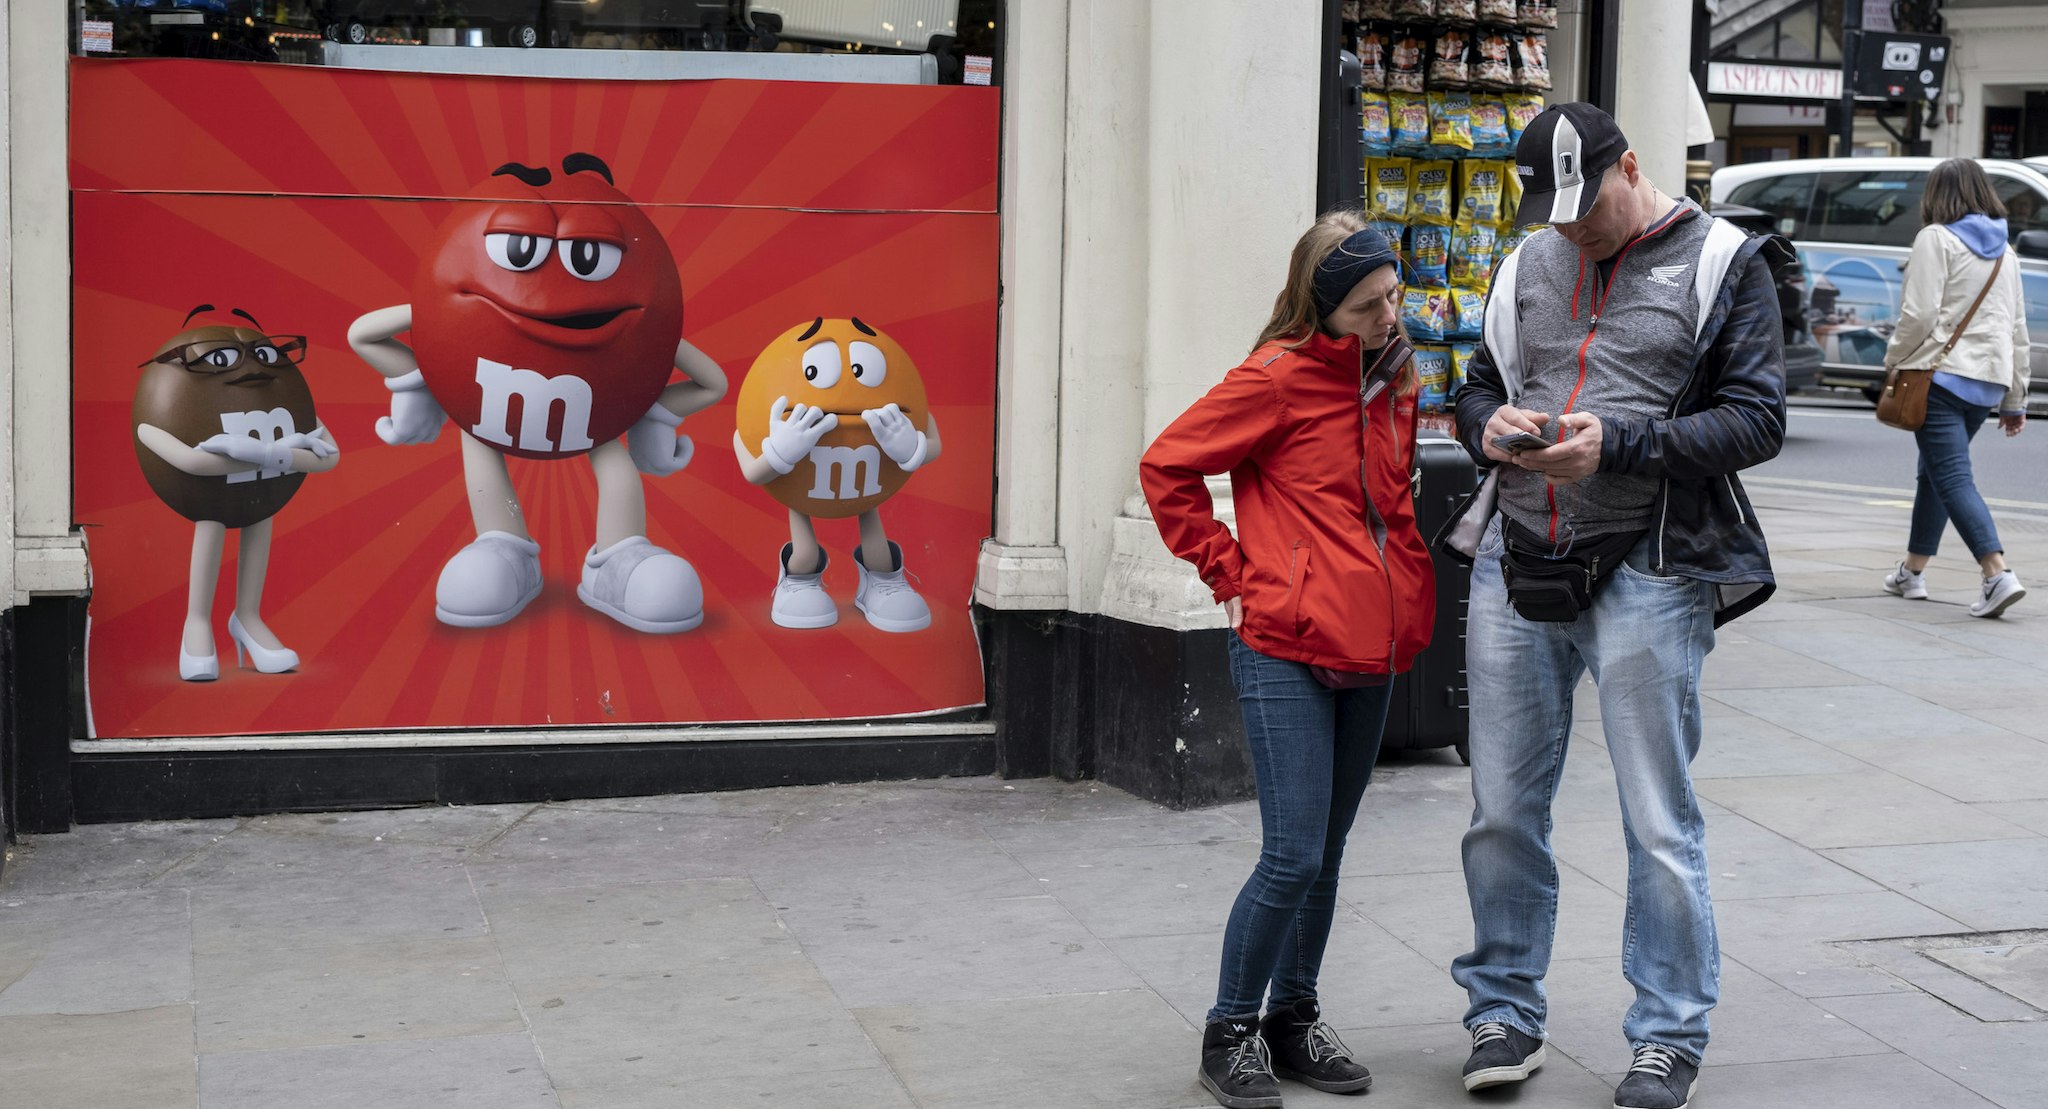 Mars Inc., the company behind M&Ms, is a key member of a group of advertisers seeking to withhold ads from disfavored news outlets.(photo by Mike Kemp/In Pictures via Getty Images)